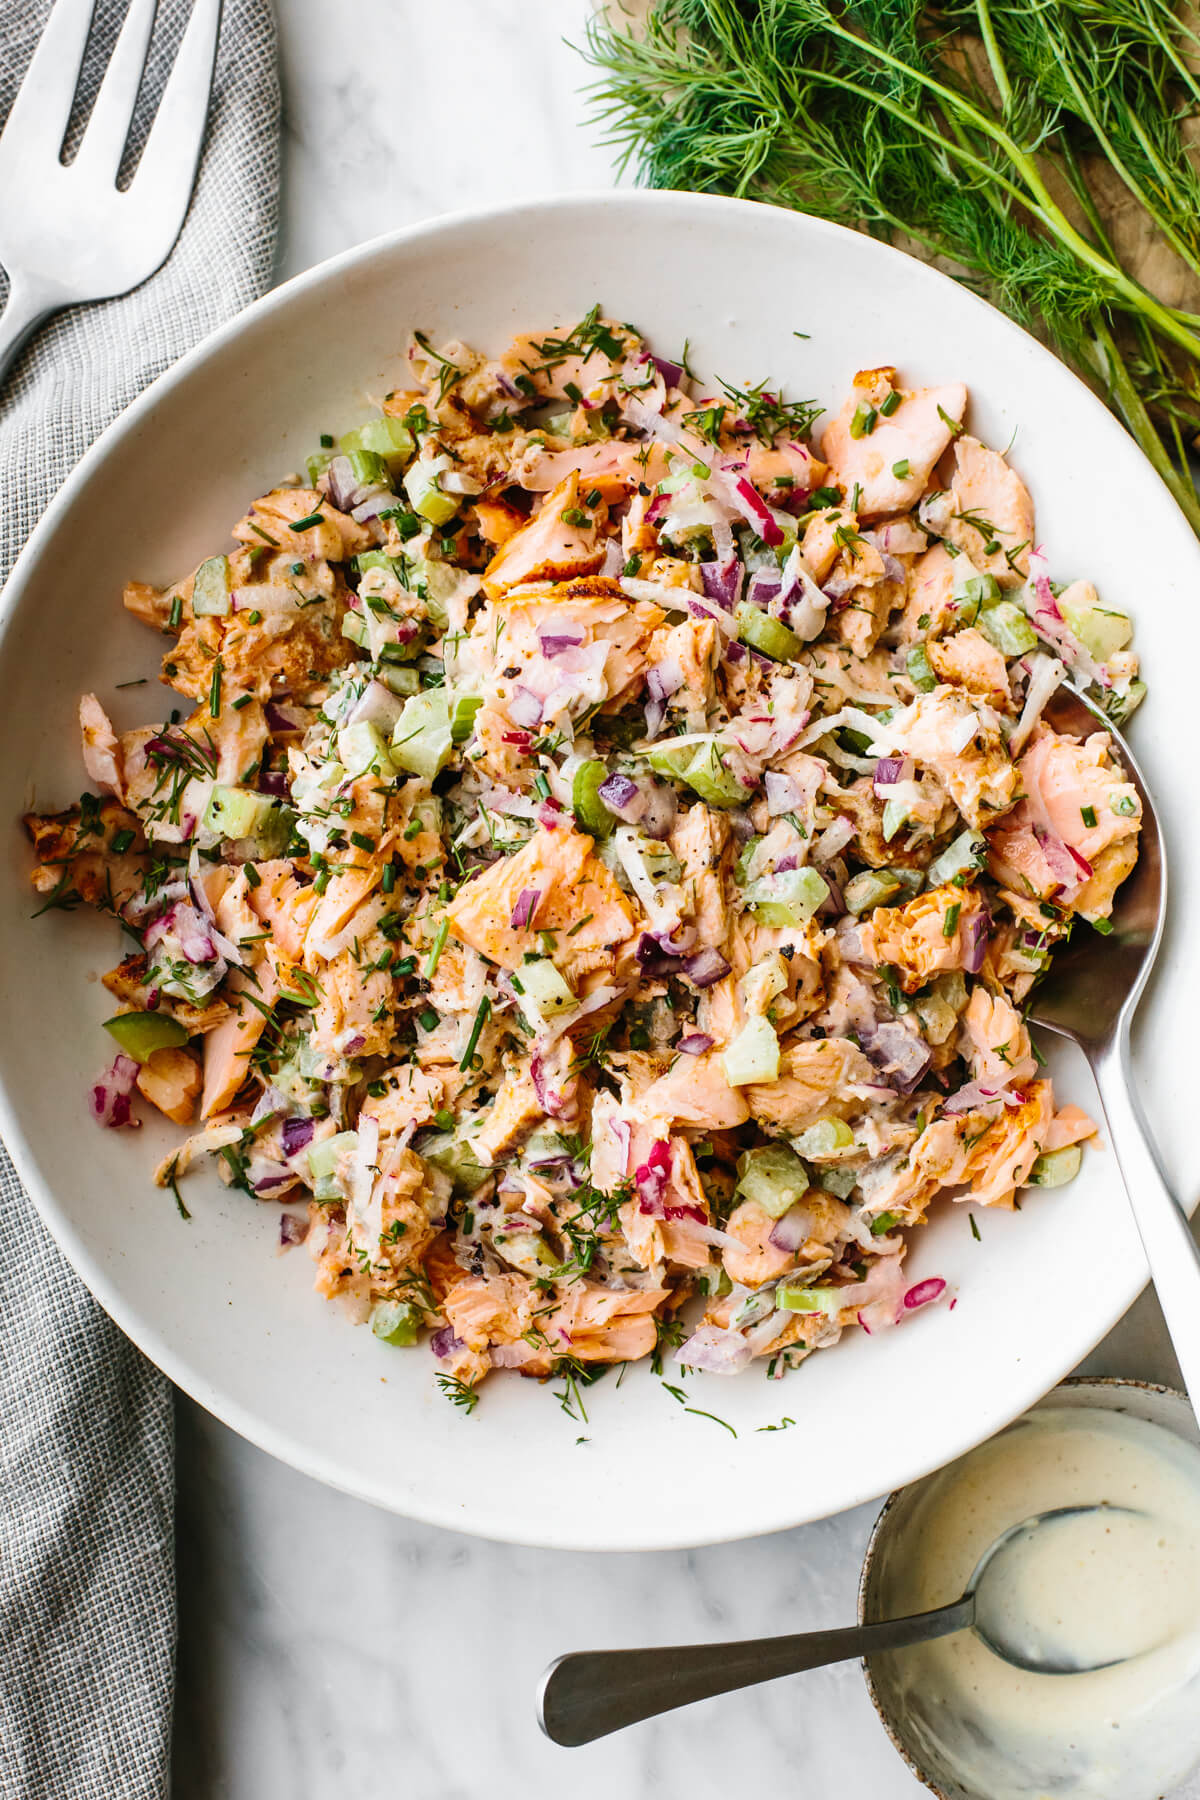 Salmon salad in a large white bowl